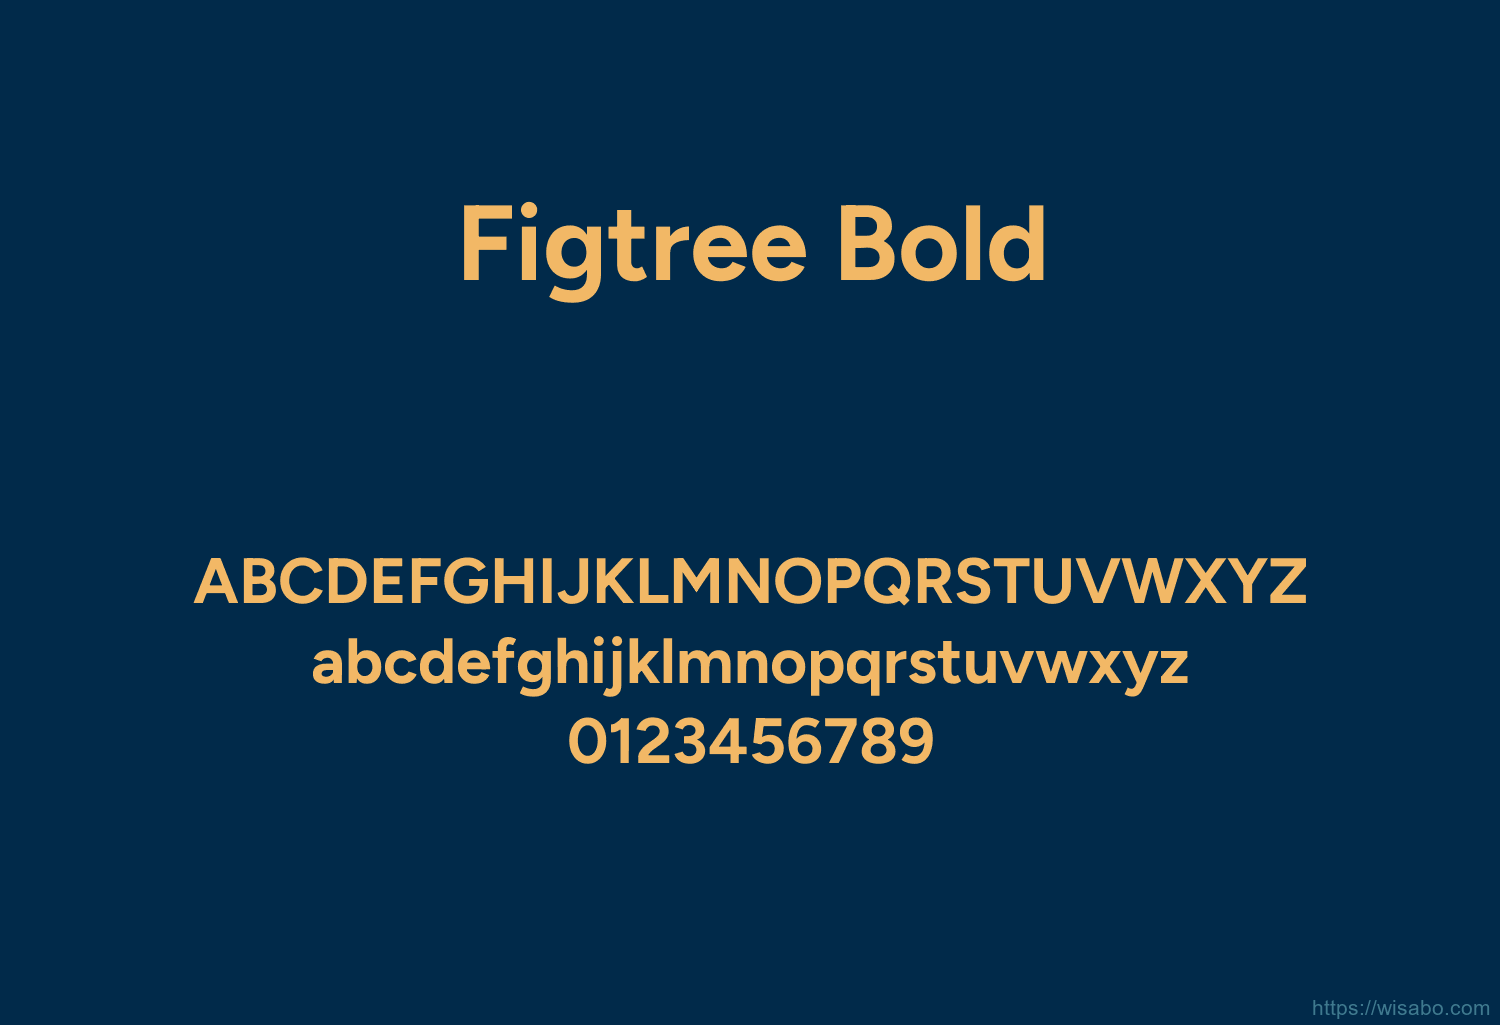 Figtree Bold